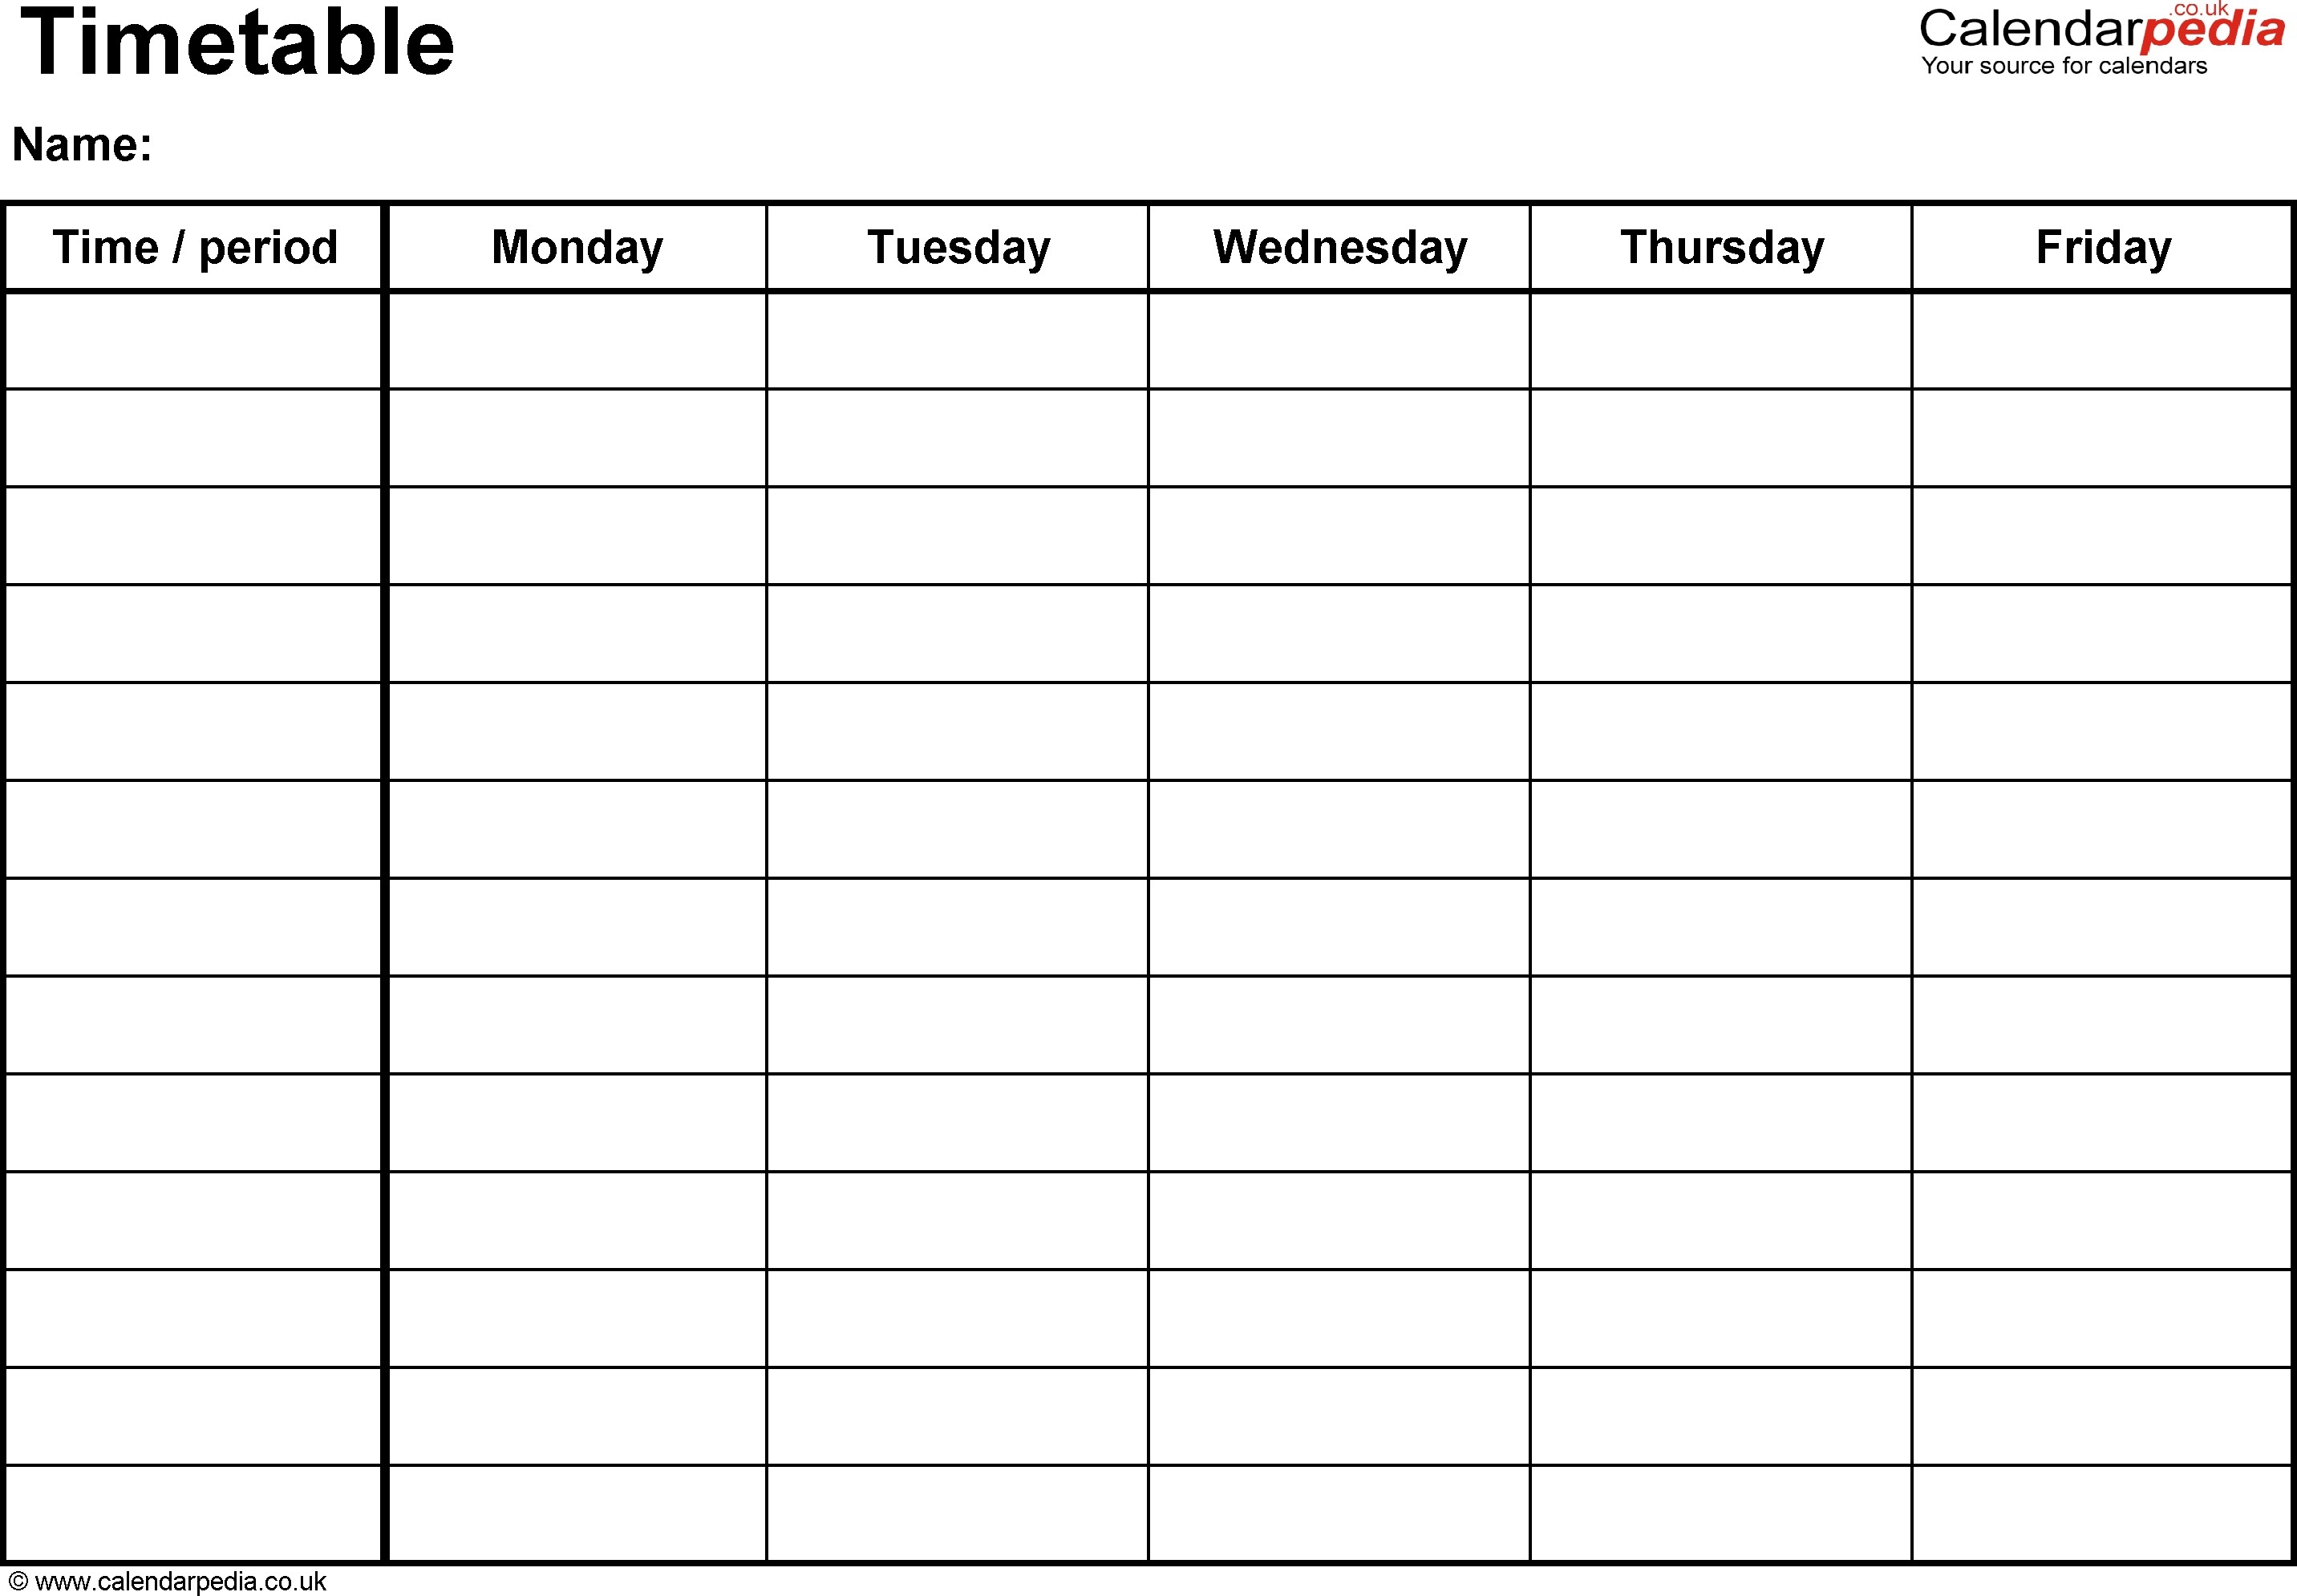 Timetable Monday Friday In 30 Day Calendar Template Excel in 30 Day Calendar Template Excel